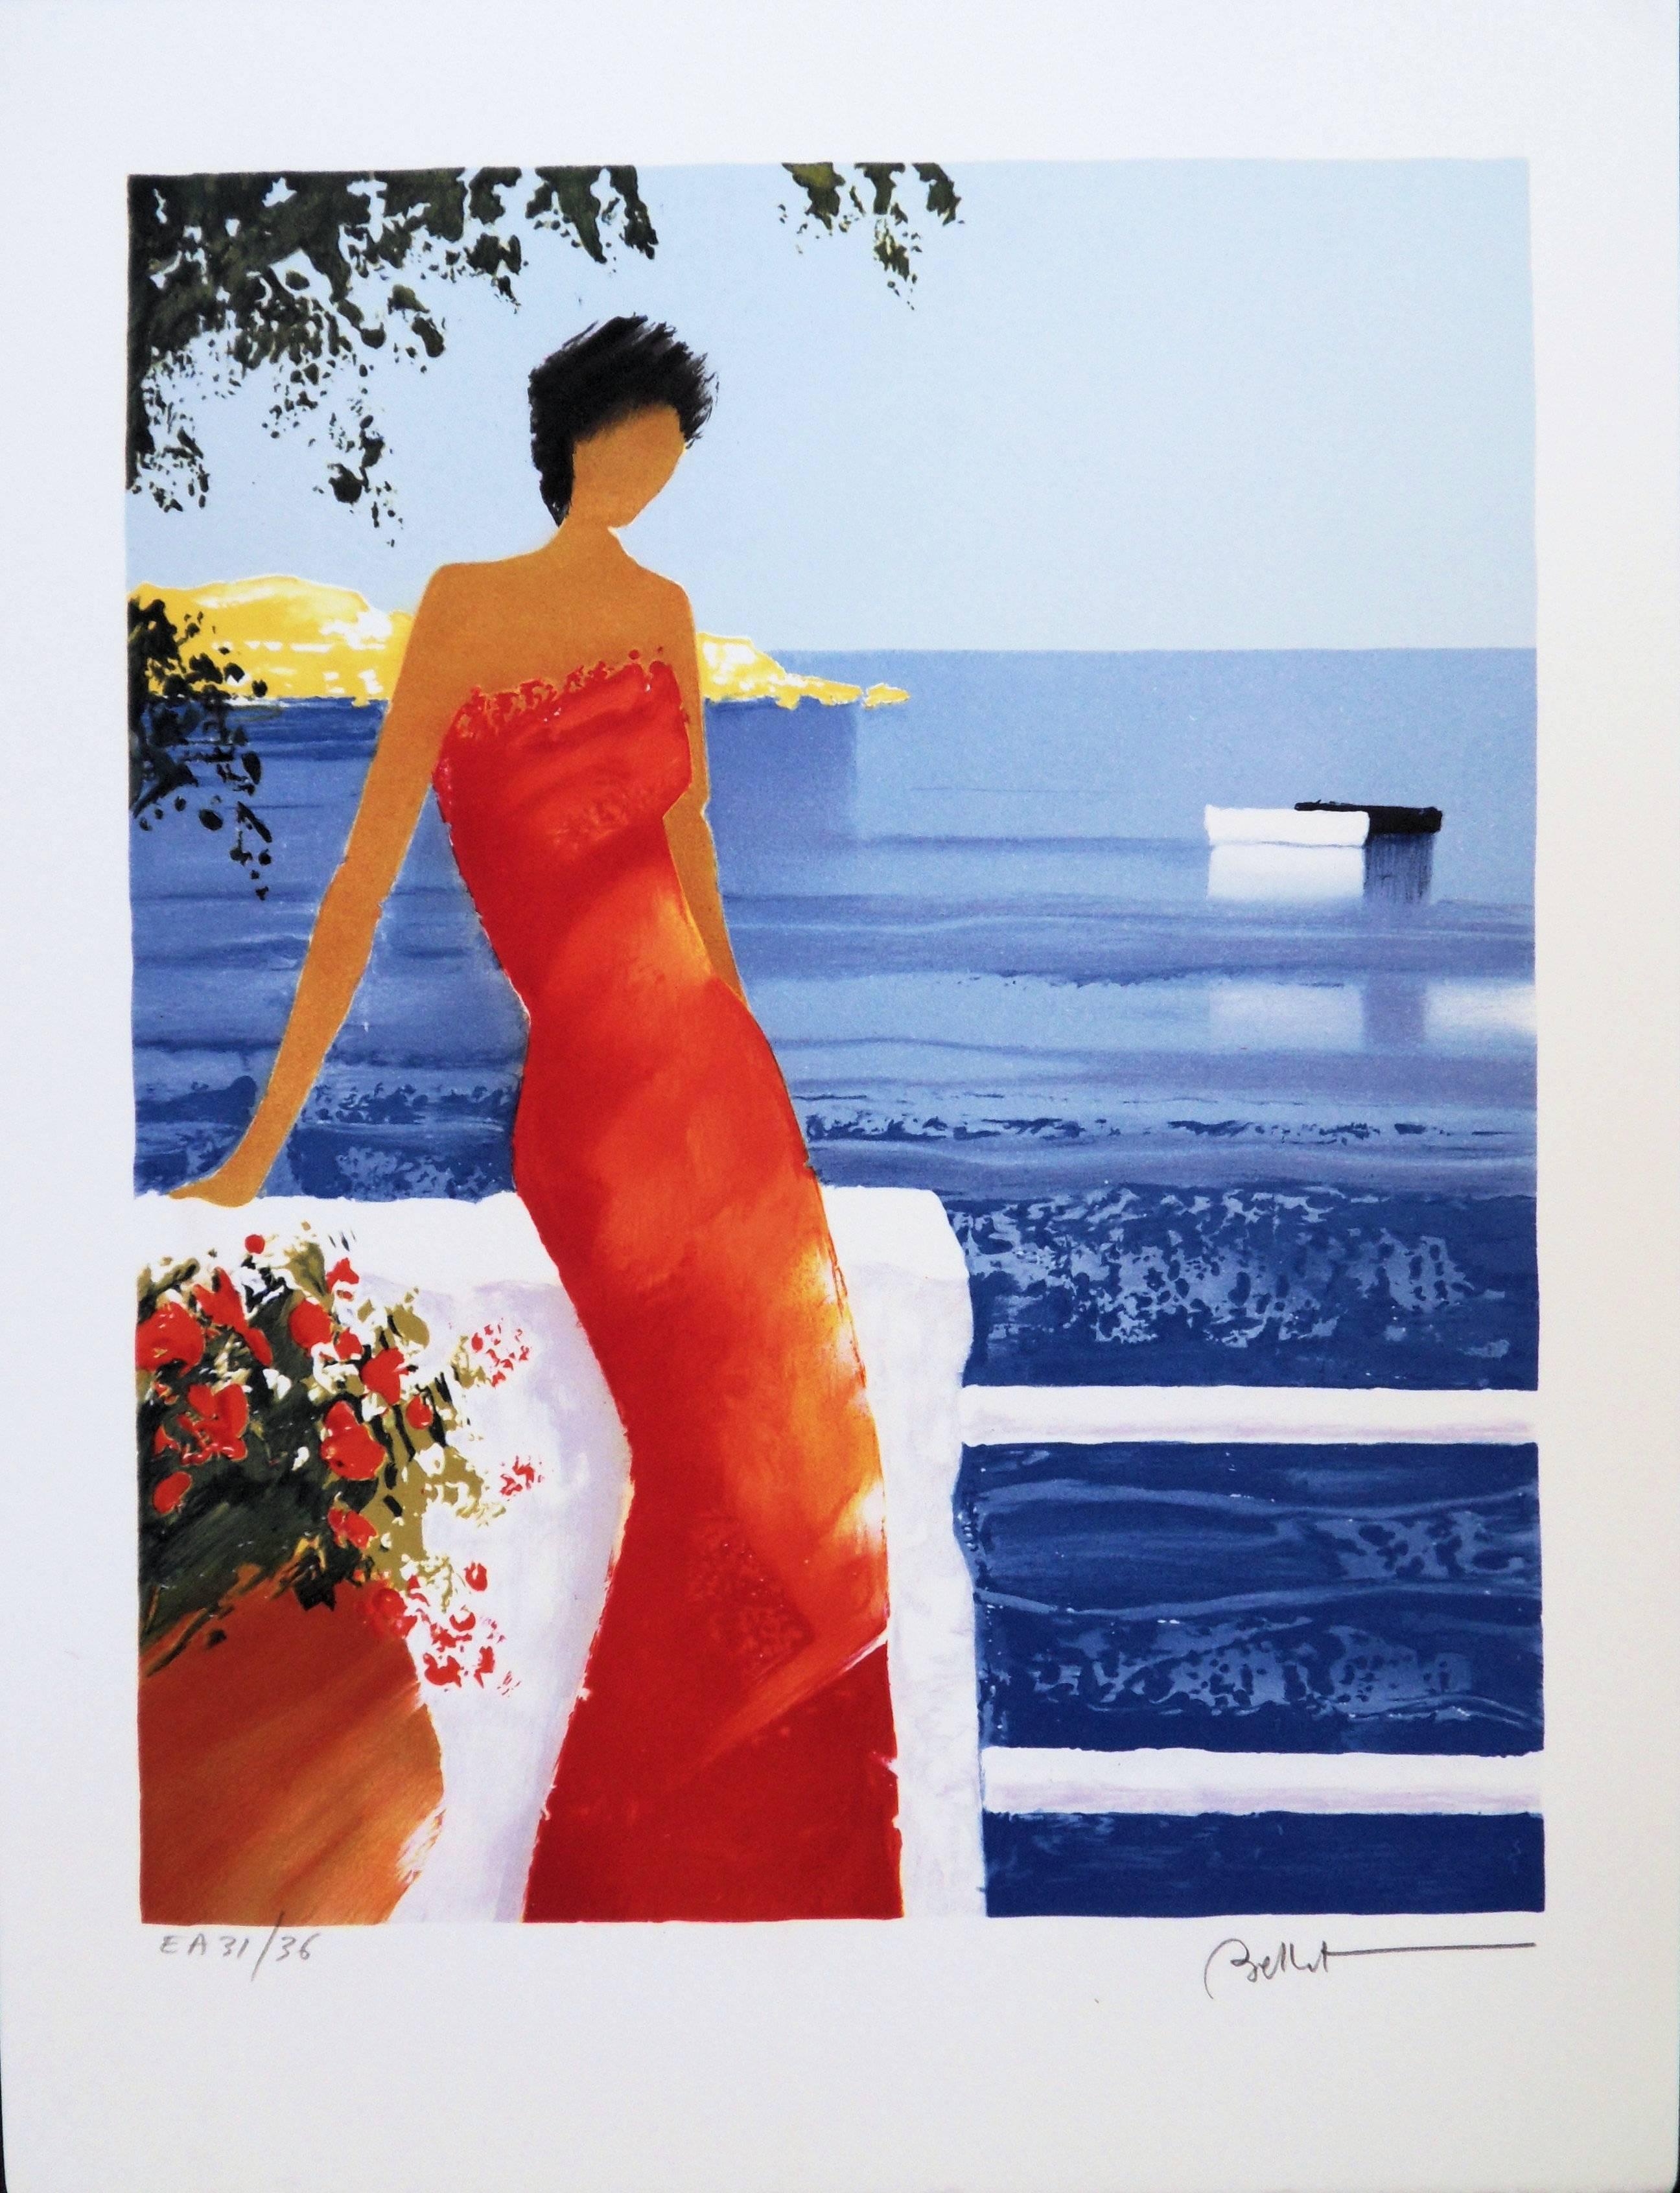 Emile Bellet Figurative Print - Woman in a Red Dress in Santorini - Handsigned lithograph